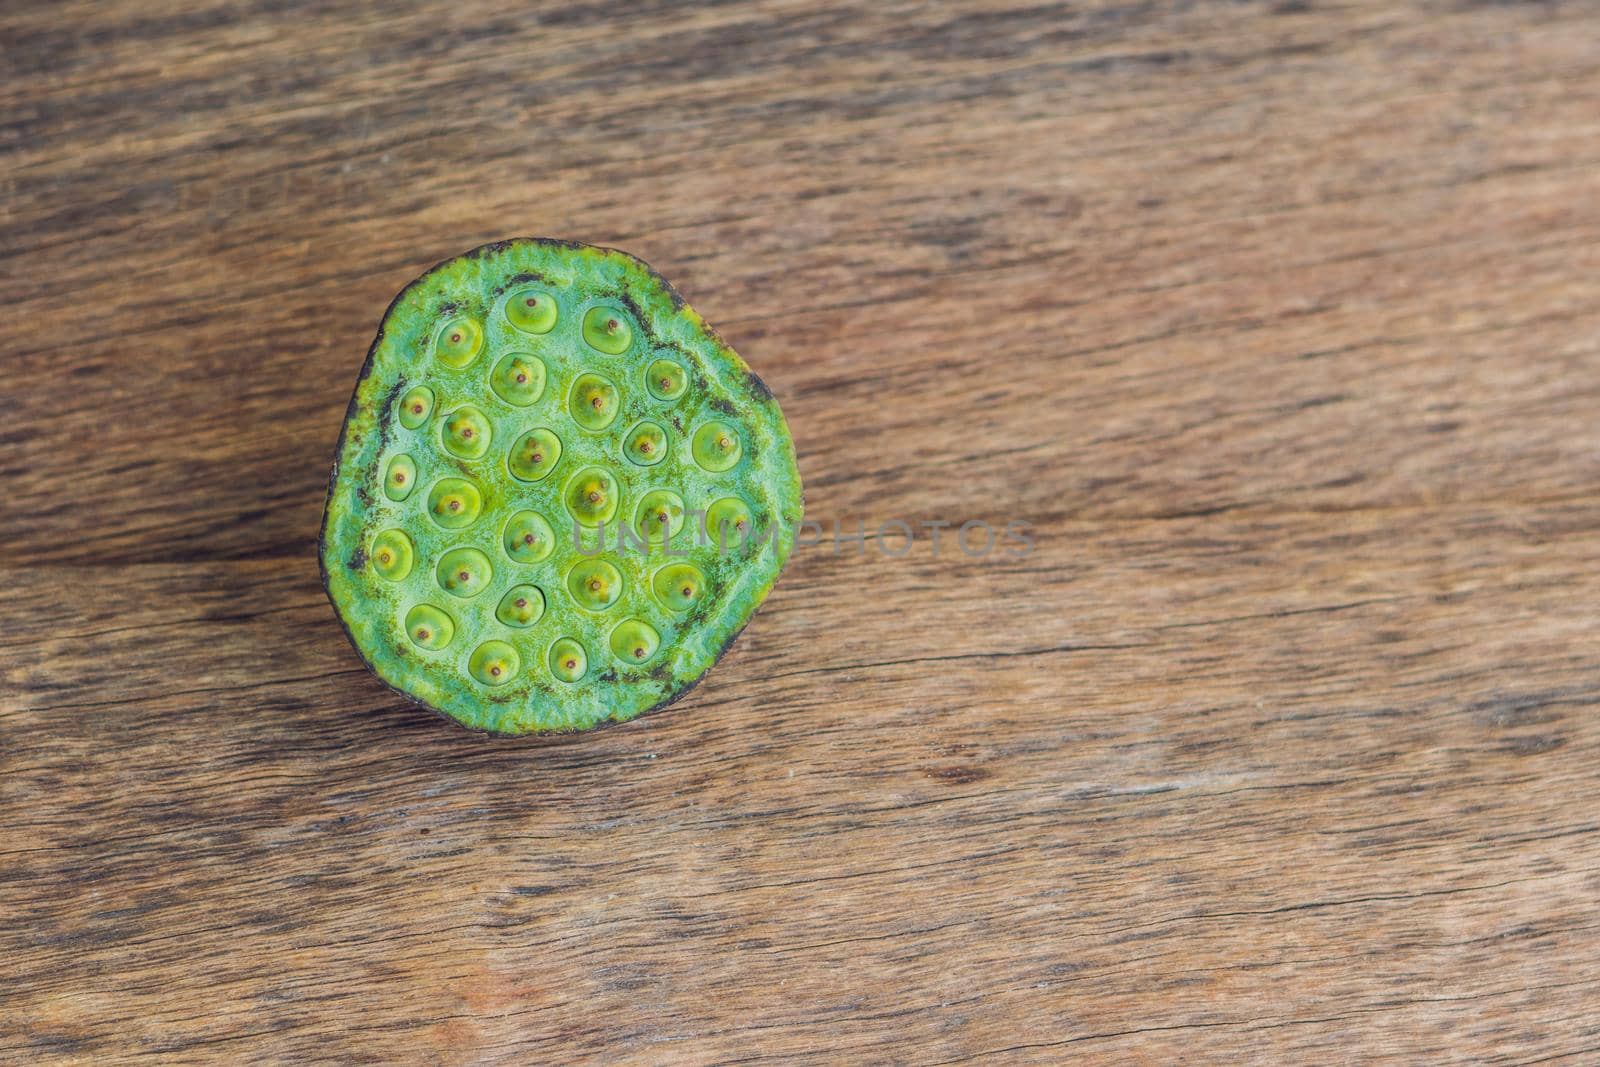 Lotus seeds on an old wooden background.